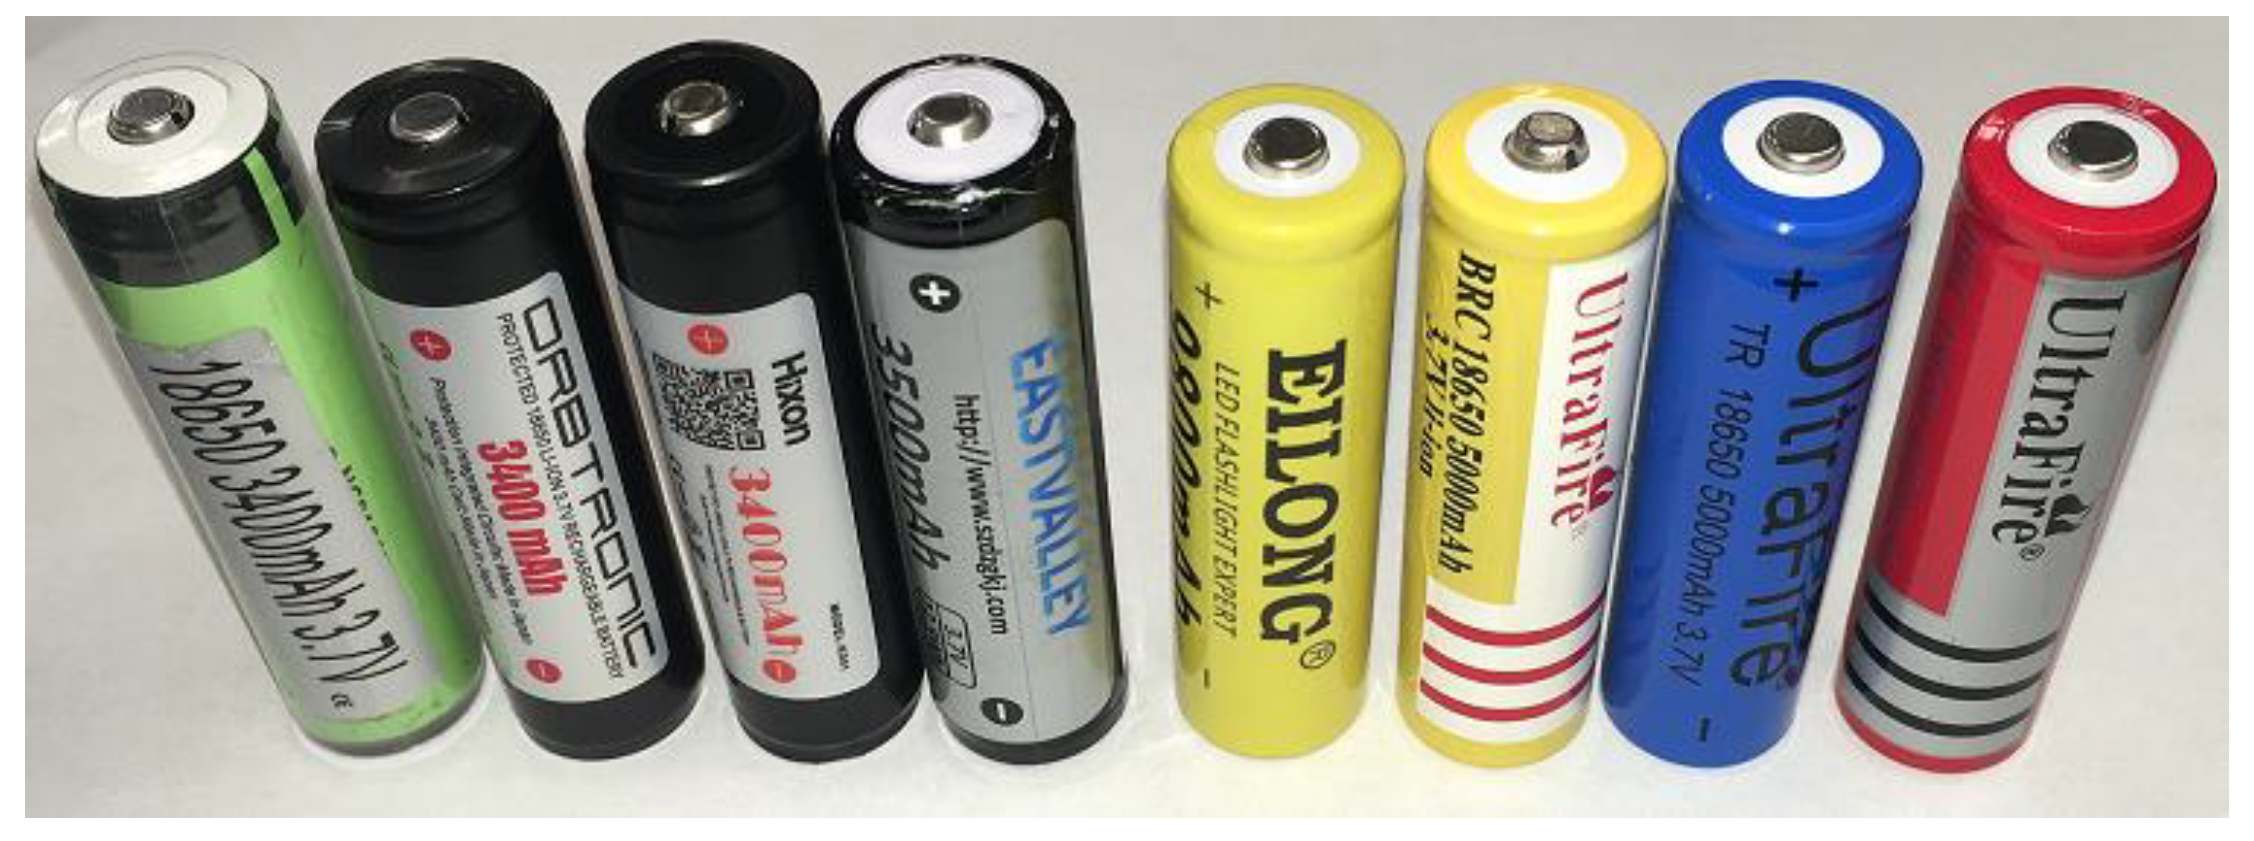 Batteries | Free Full-Text | Consumer-Based Evaluation of Commercially  Available Protected 18650 Cells